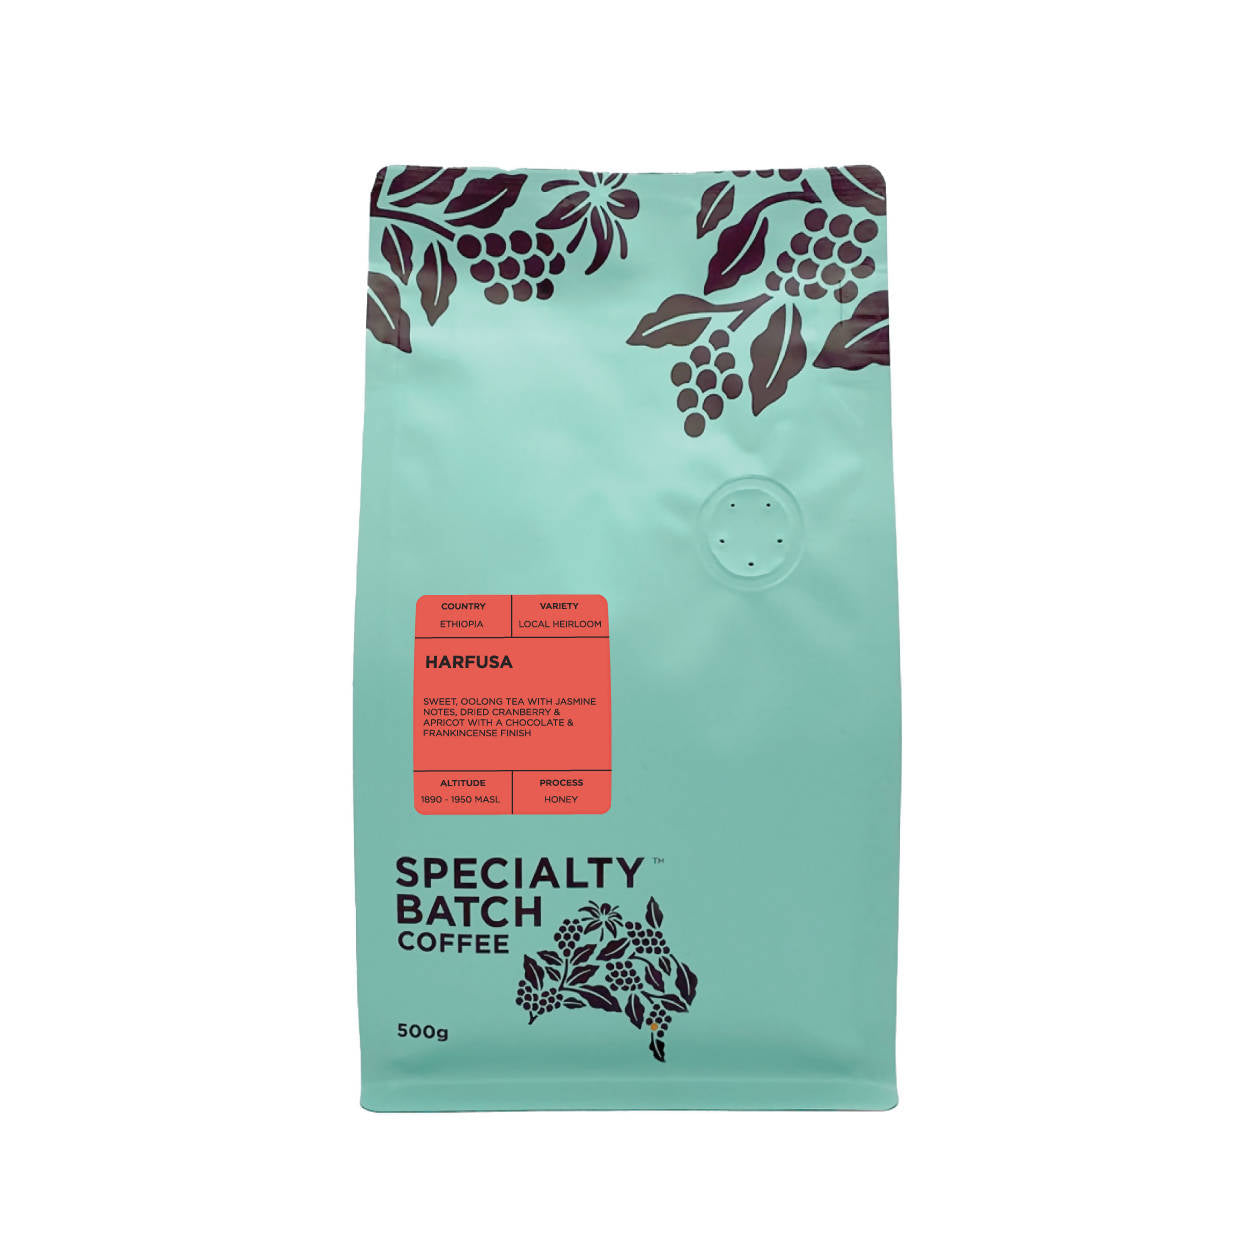 Ethiopia Harfusa- Filter - BeanBurds SPECIALTY BATCH COFFEE 1kg ( 40 - 48 cups) / Whole Beans